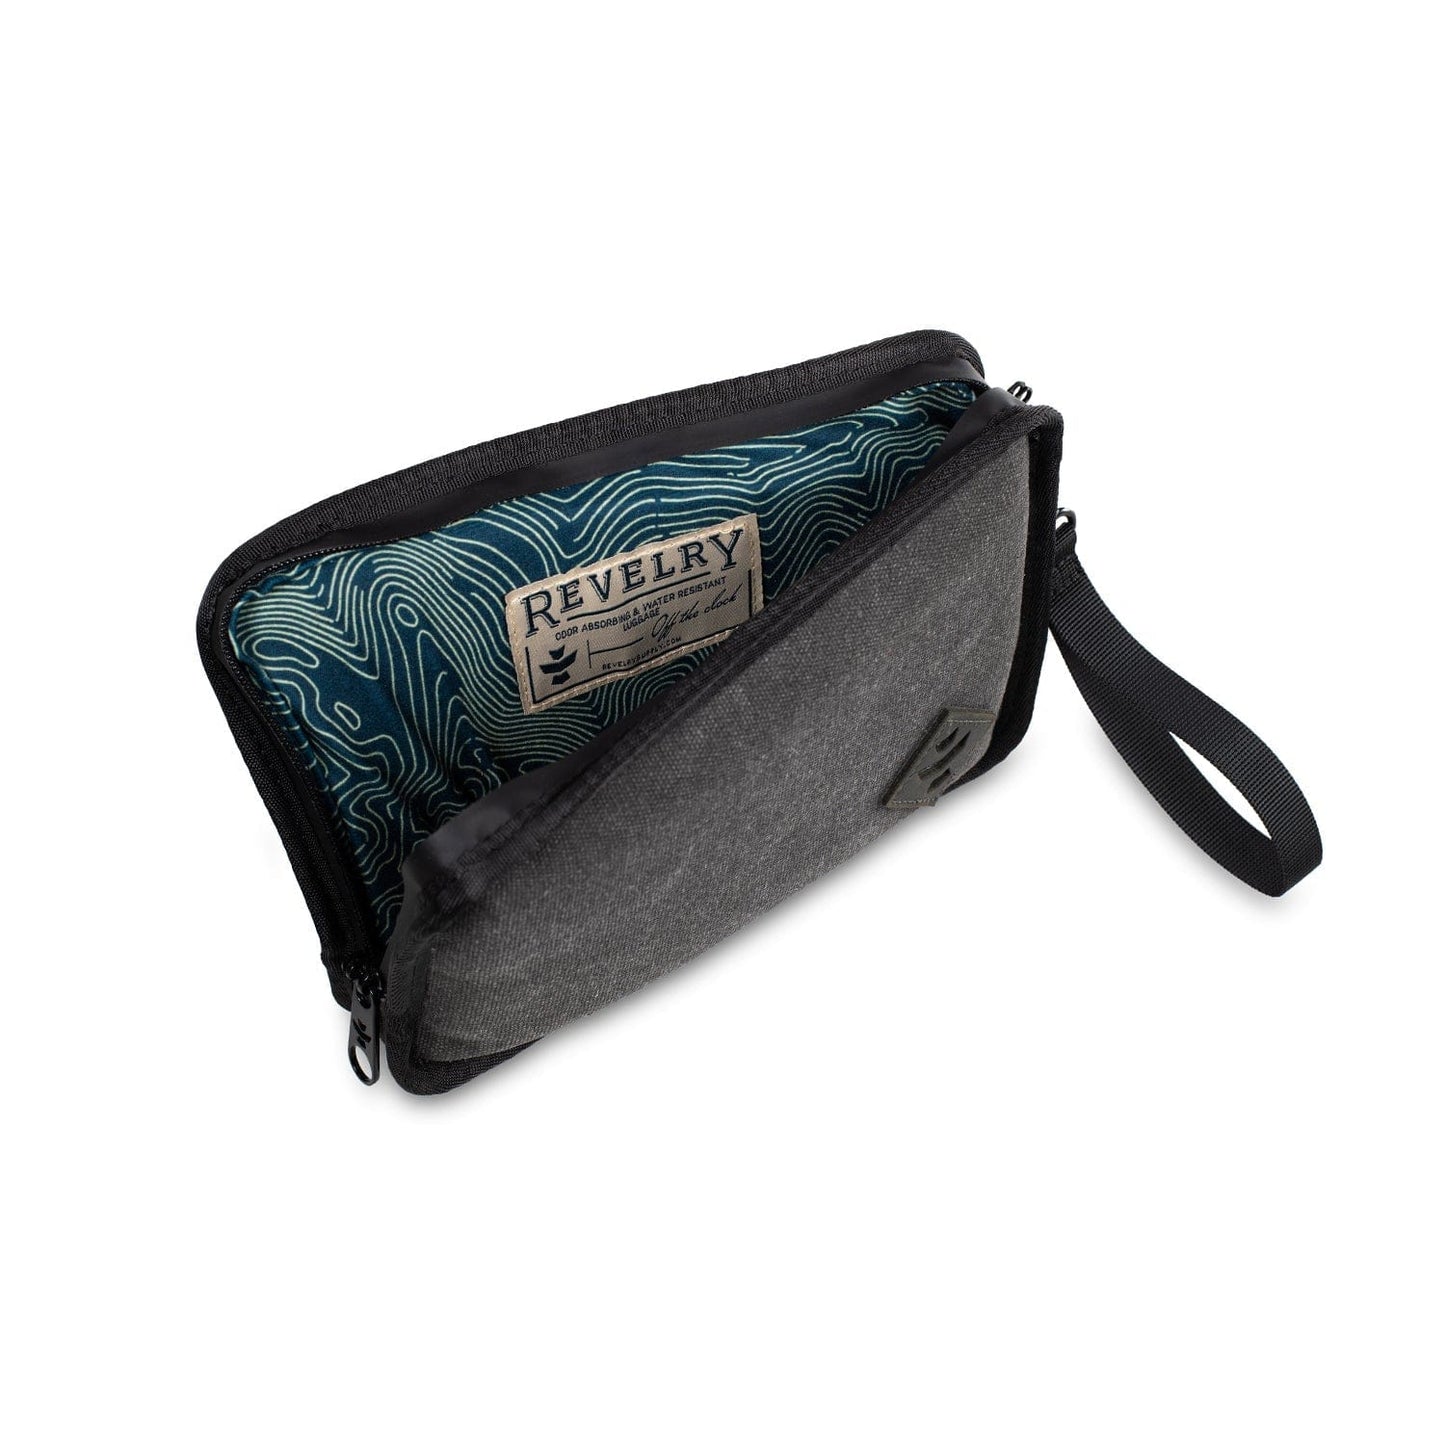 Revelry Supply The Gordo - Smell Proof Padded Pouch